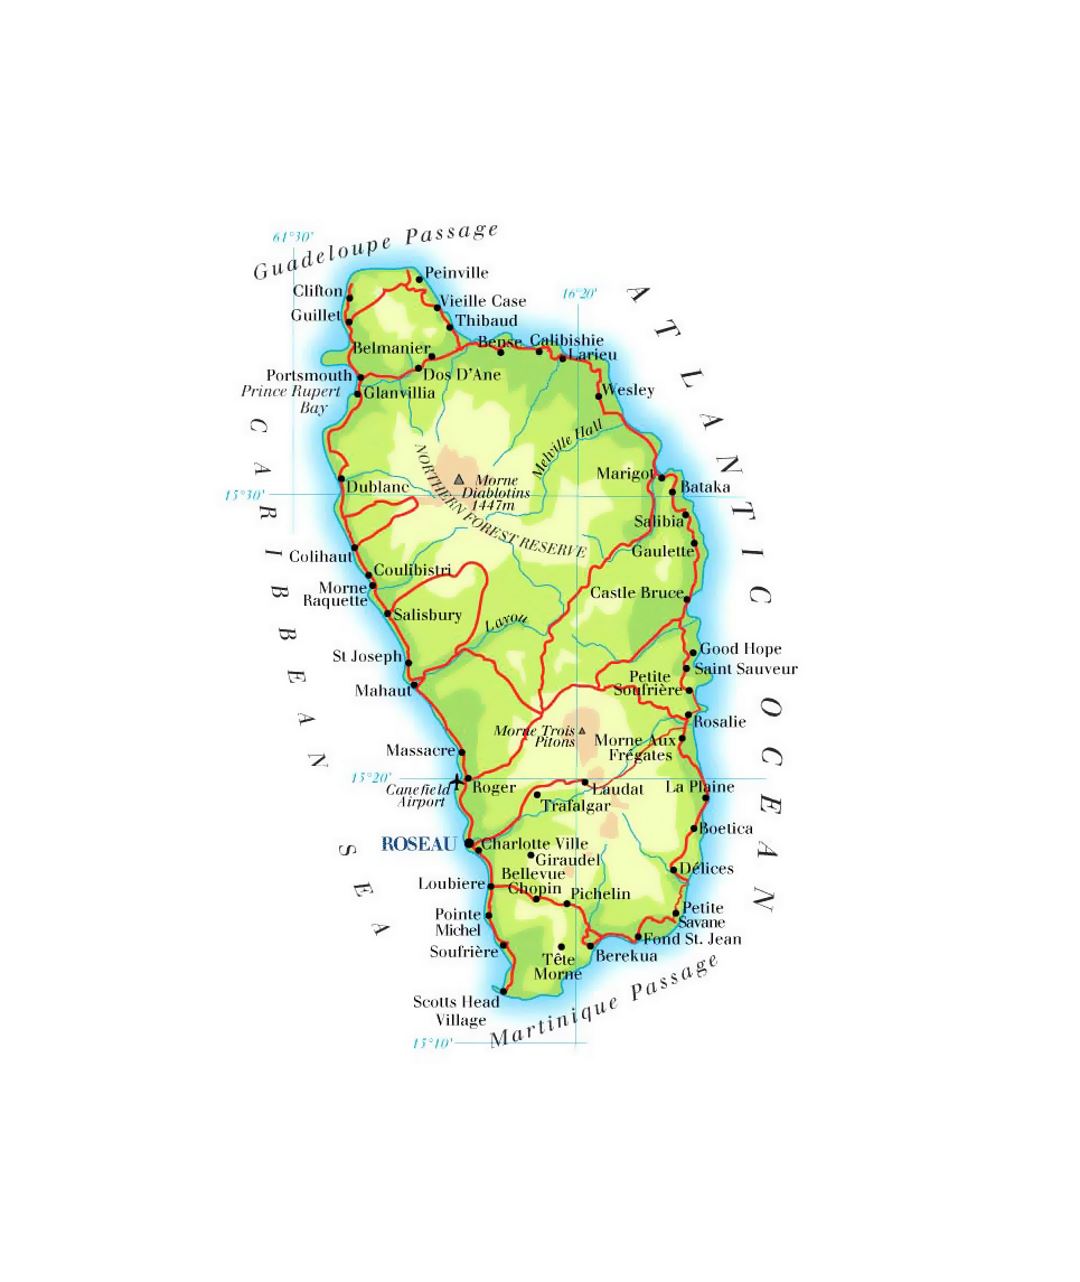 Detailed elevation map of Dominica with roads, cities and airports